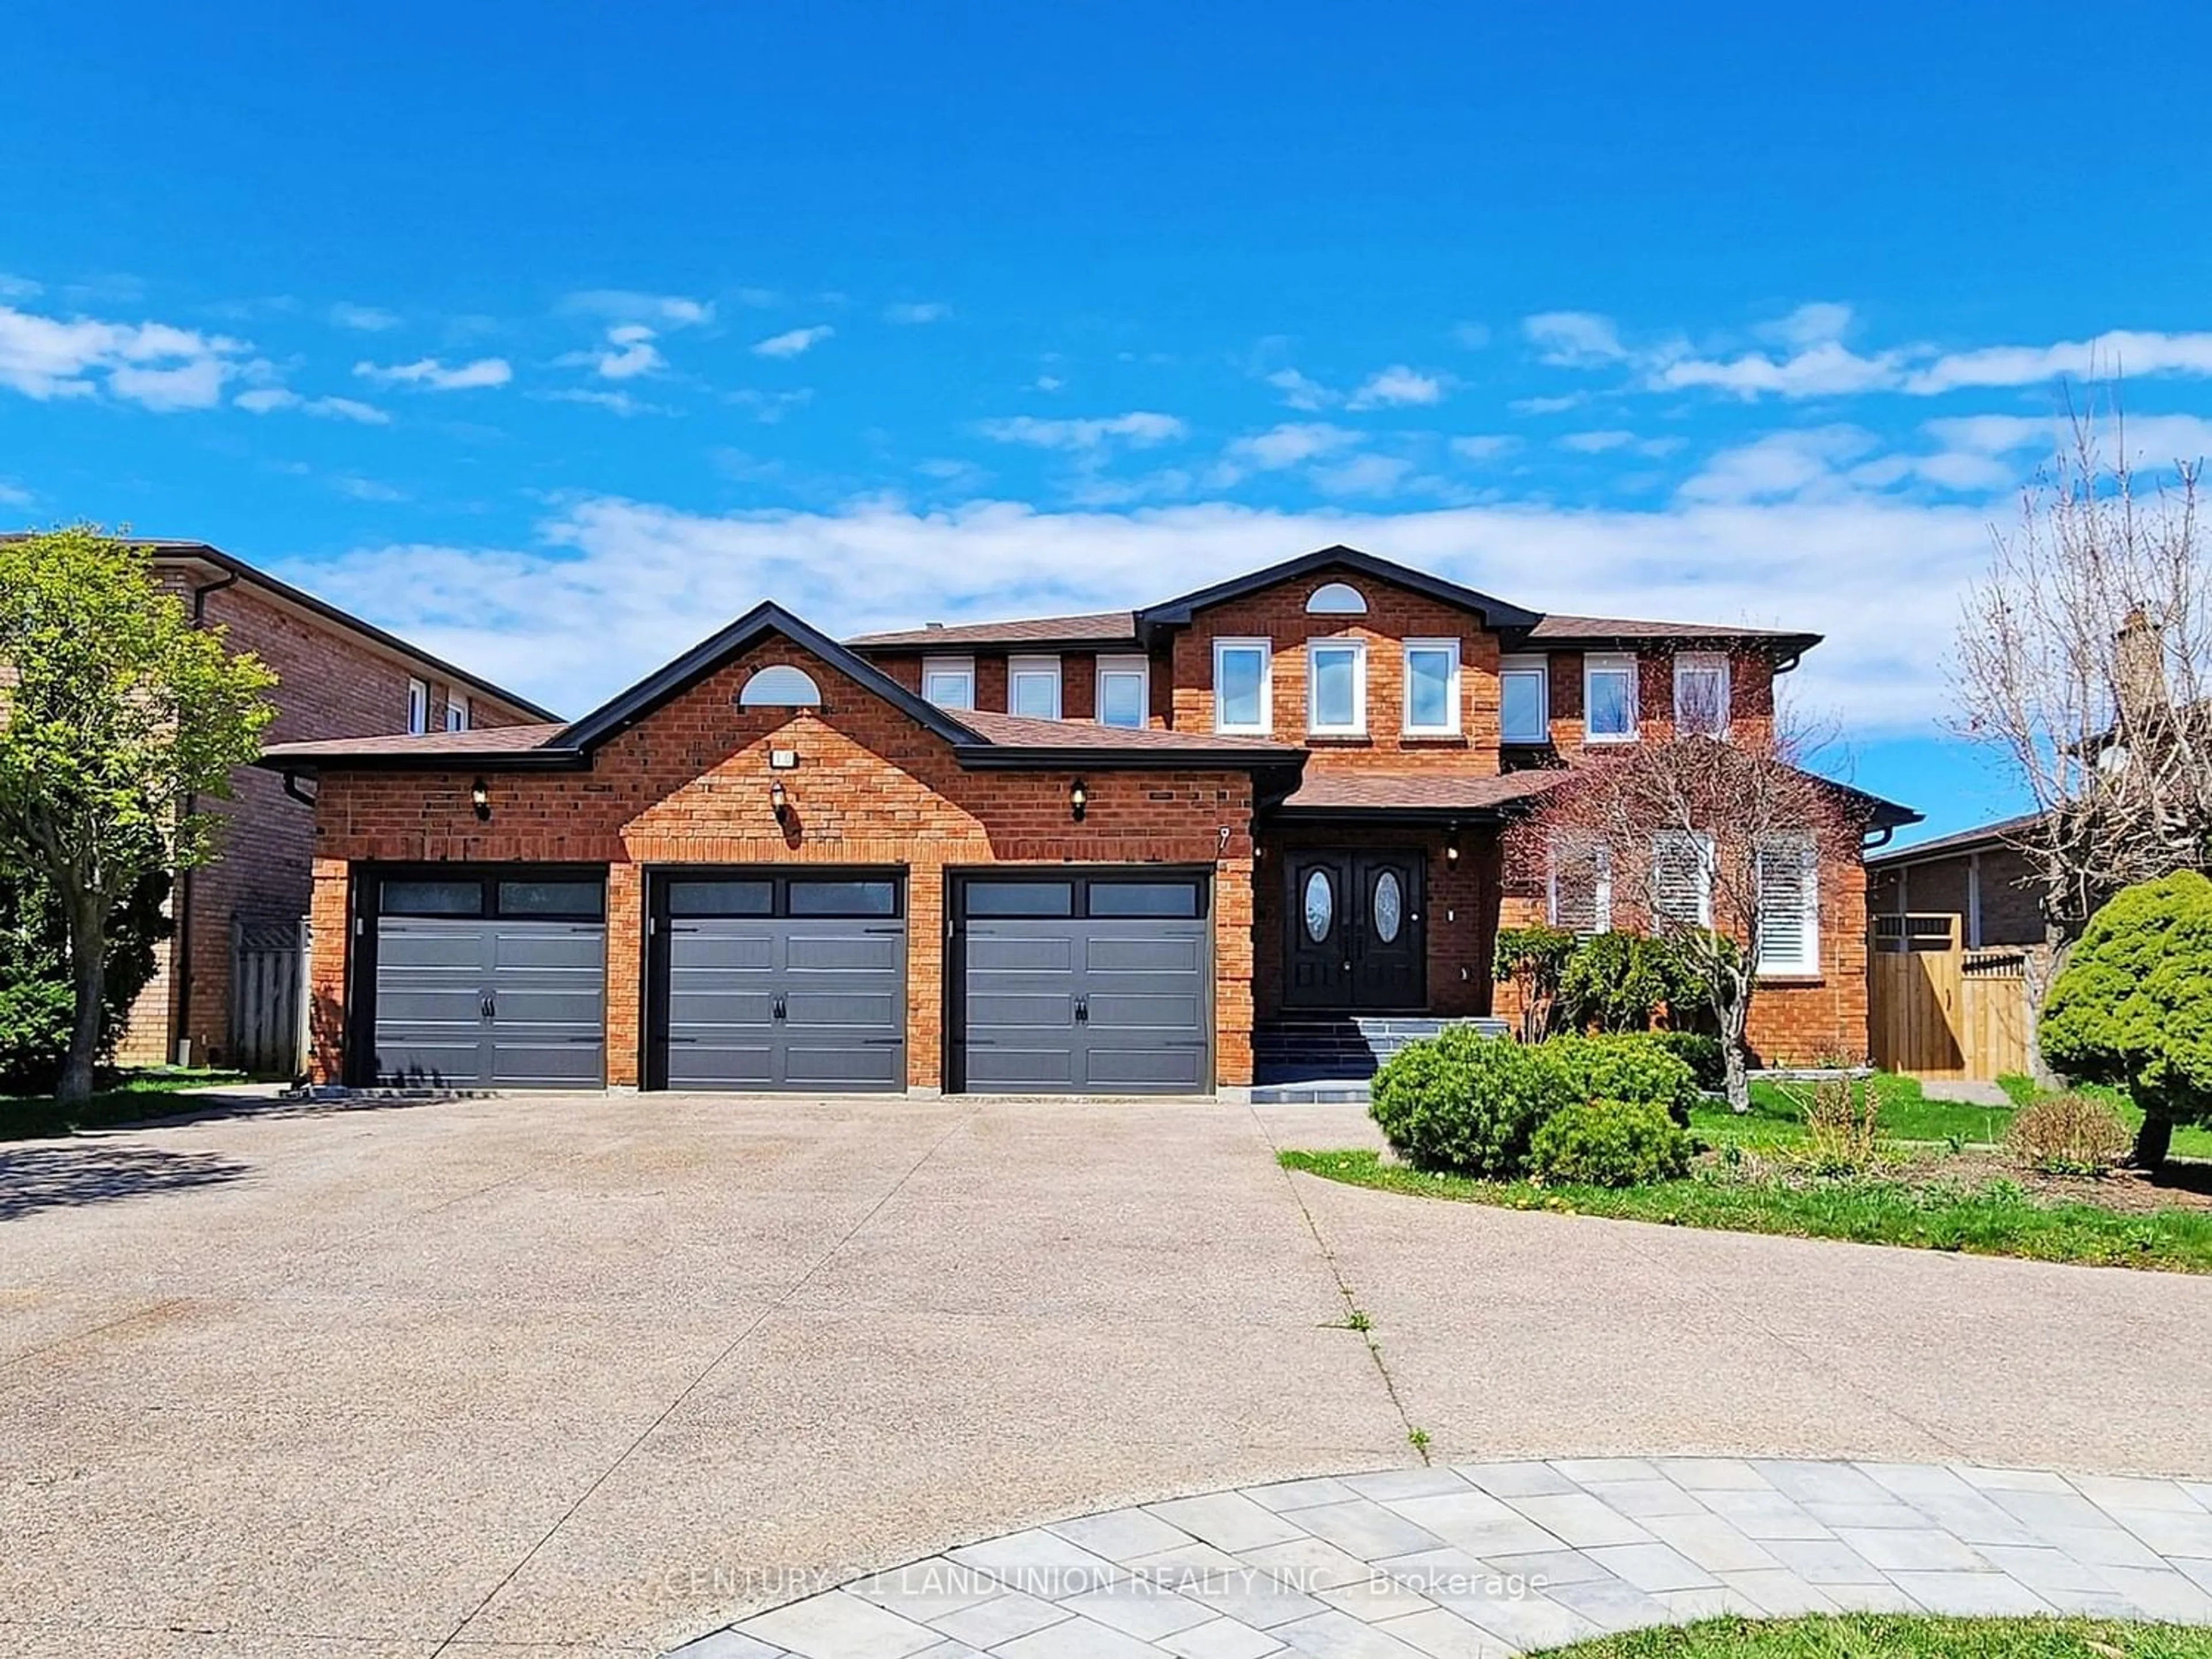 Home with brick exterior material for 18 Ravenhill Cres, Markham Ontario L3S 2V1